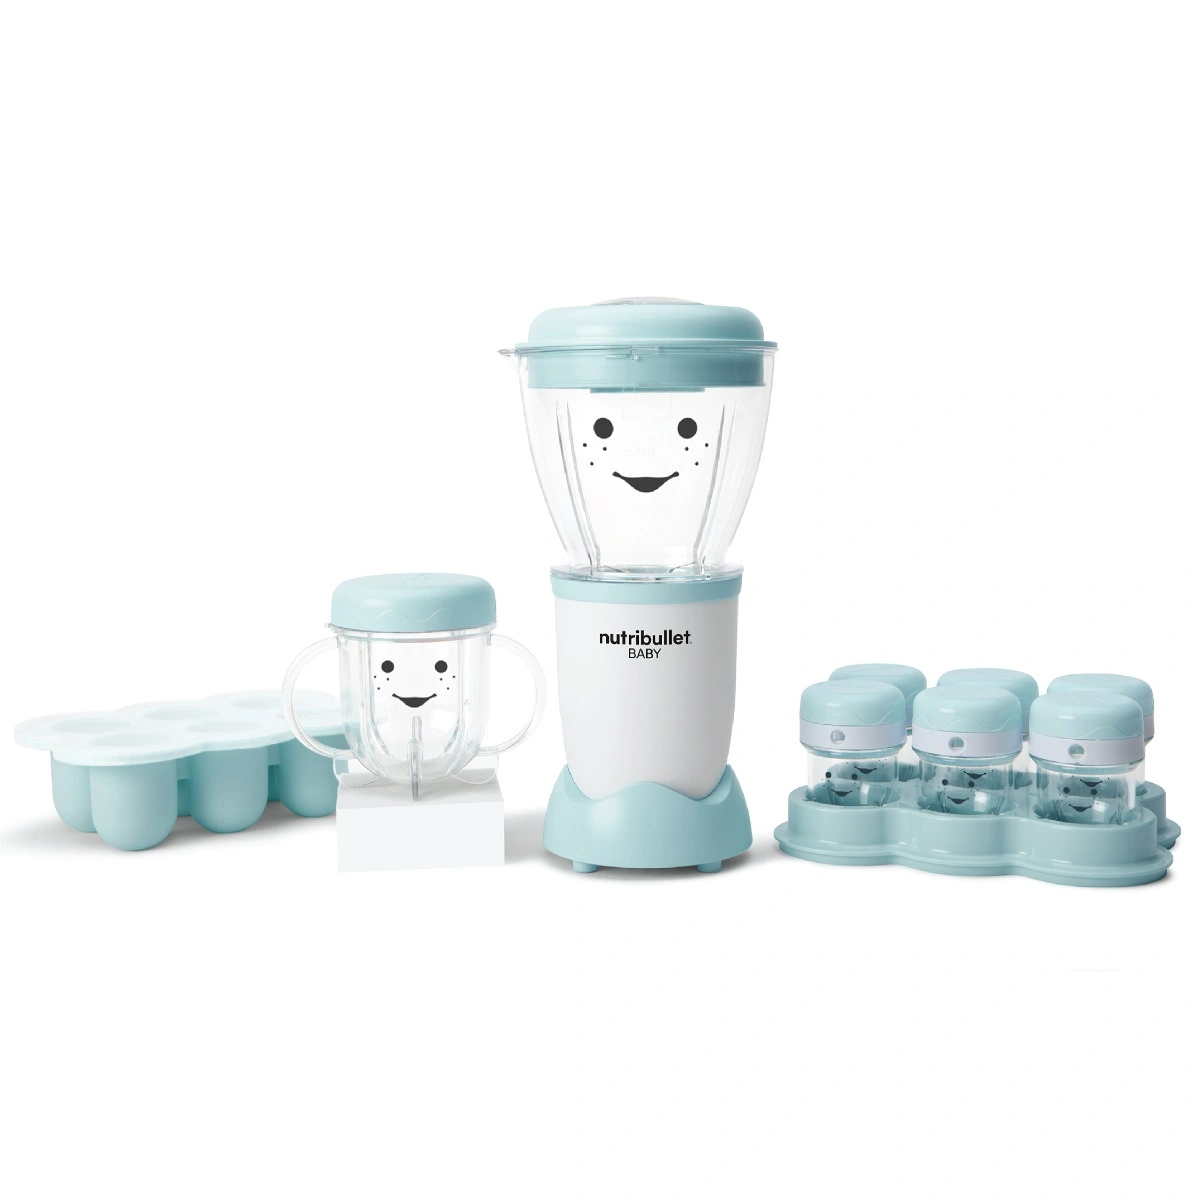 https://www.digitrolley.com/wp-content/uploads/2023/10/Nutribullet-Baby-blender-200-W-18-piece-set-Baby-care-system-Multi-function-high-speed-blender-Mixer-system-with-nutrient-extractor.webp